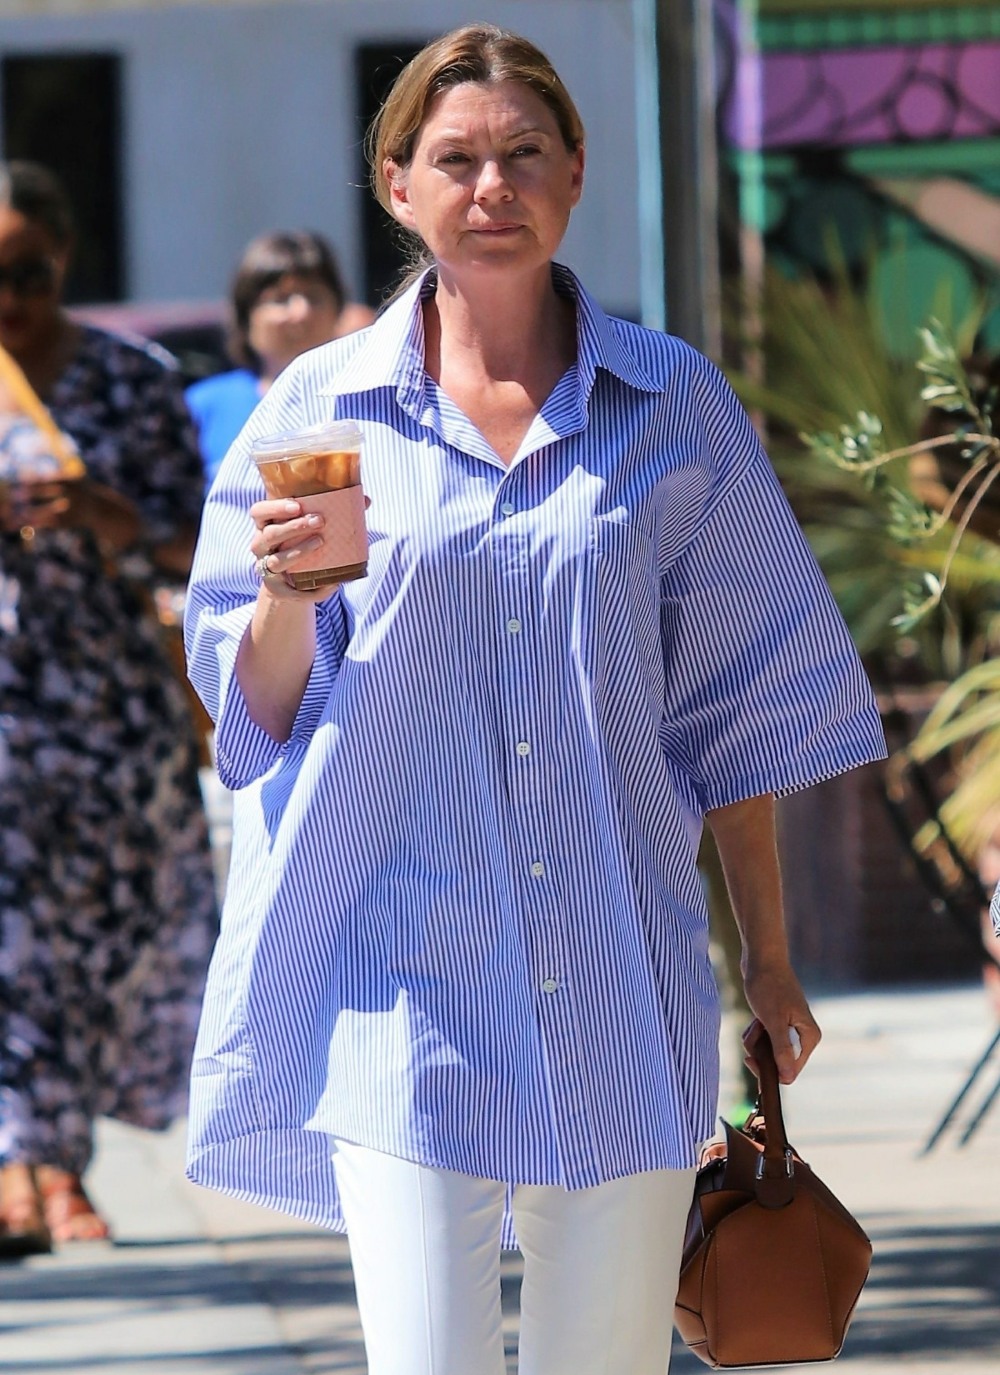 Actress Ellen Pompeo grabs coffee while rocking oversized shirt during outing at Alfred's